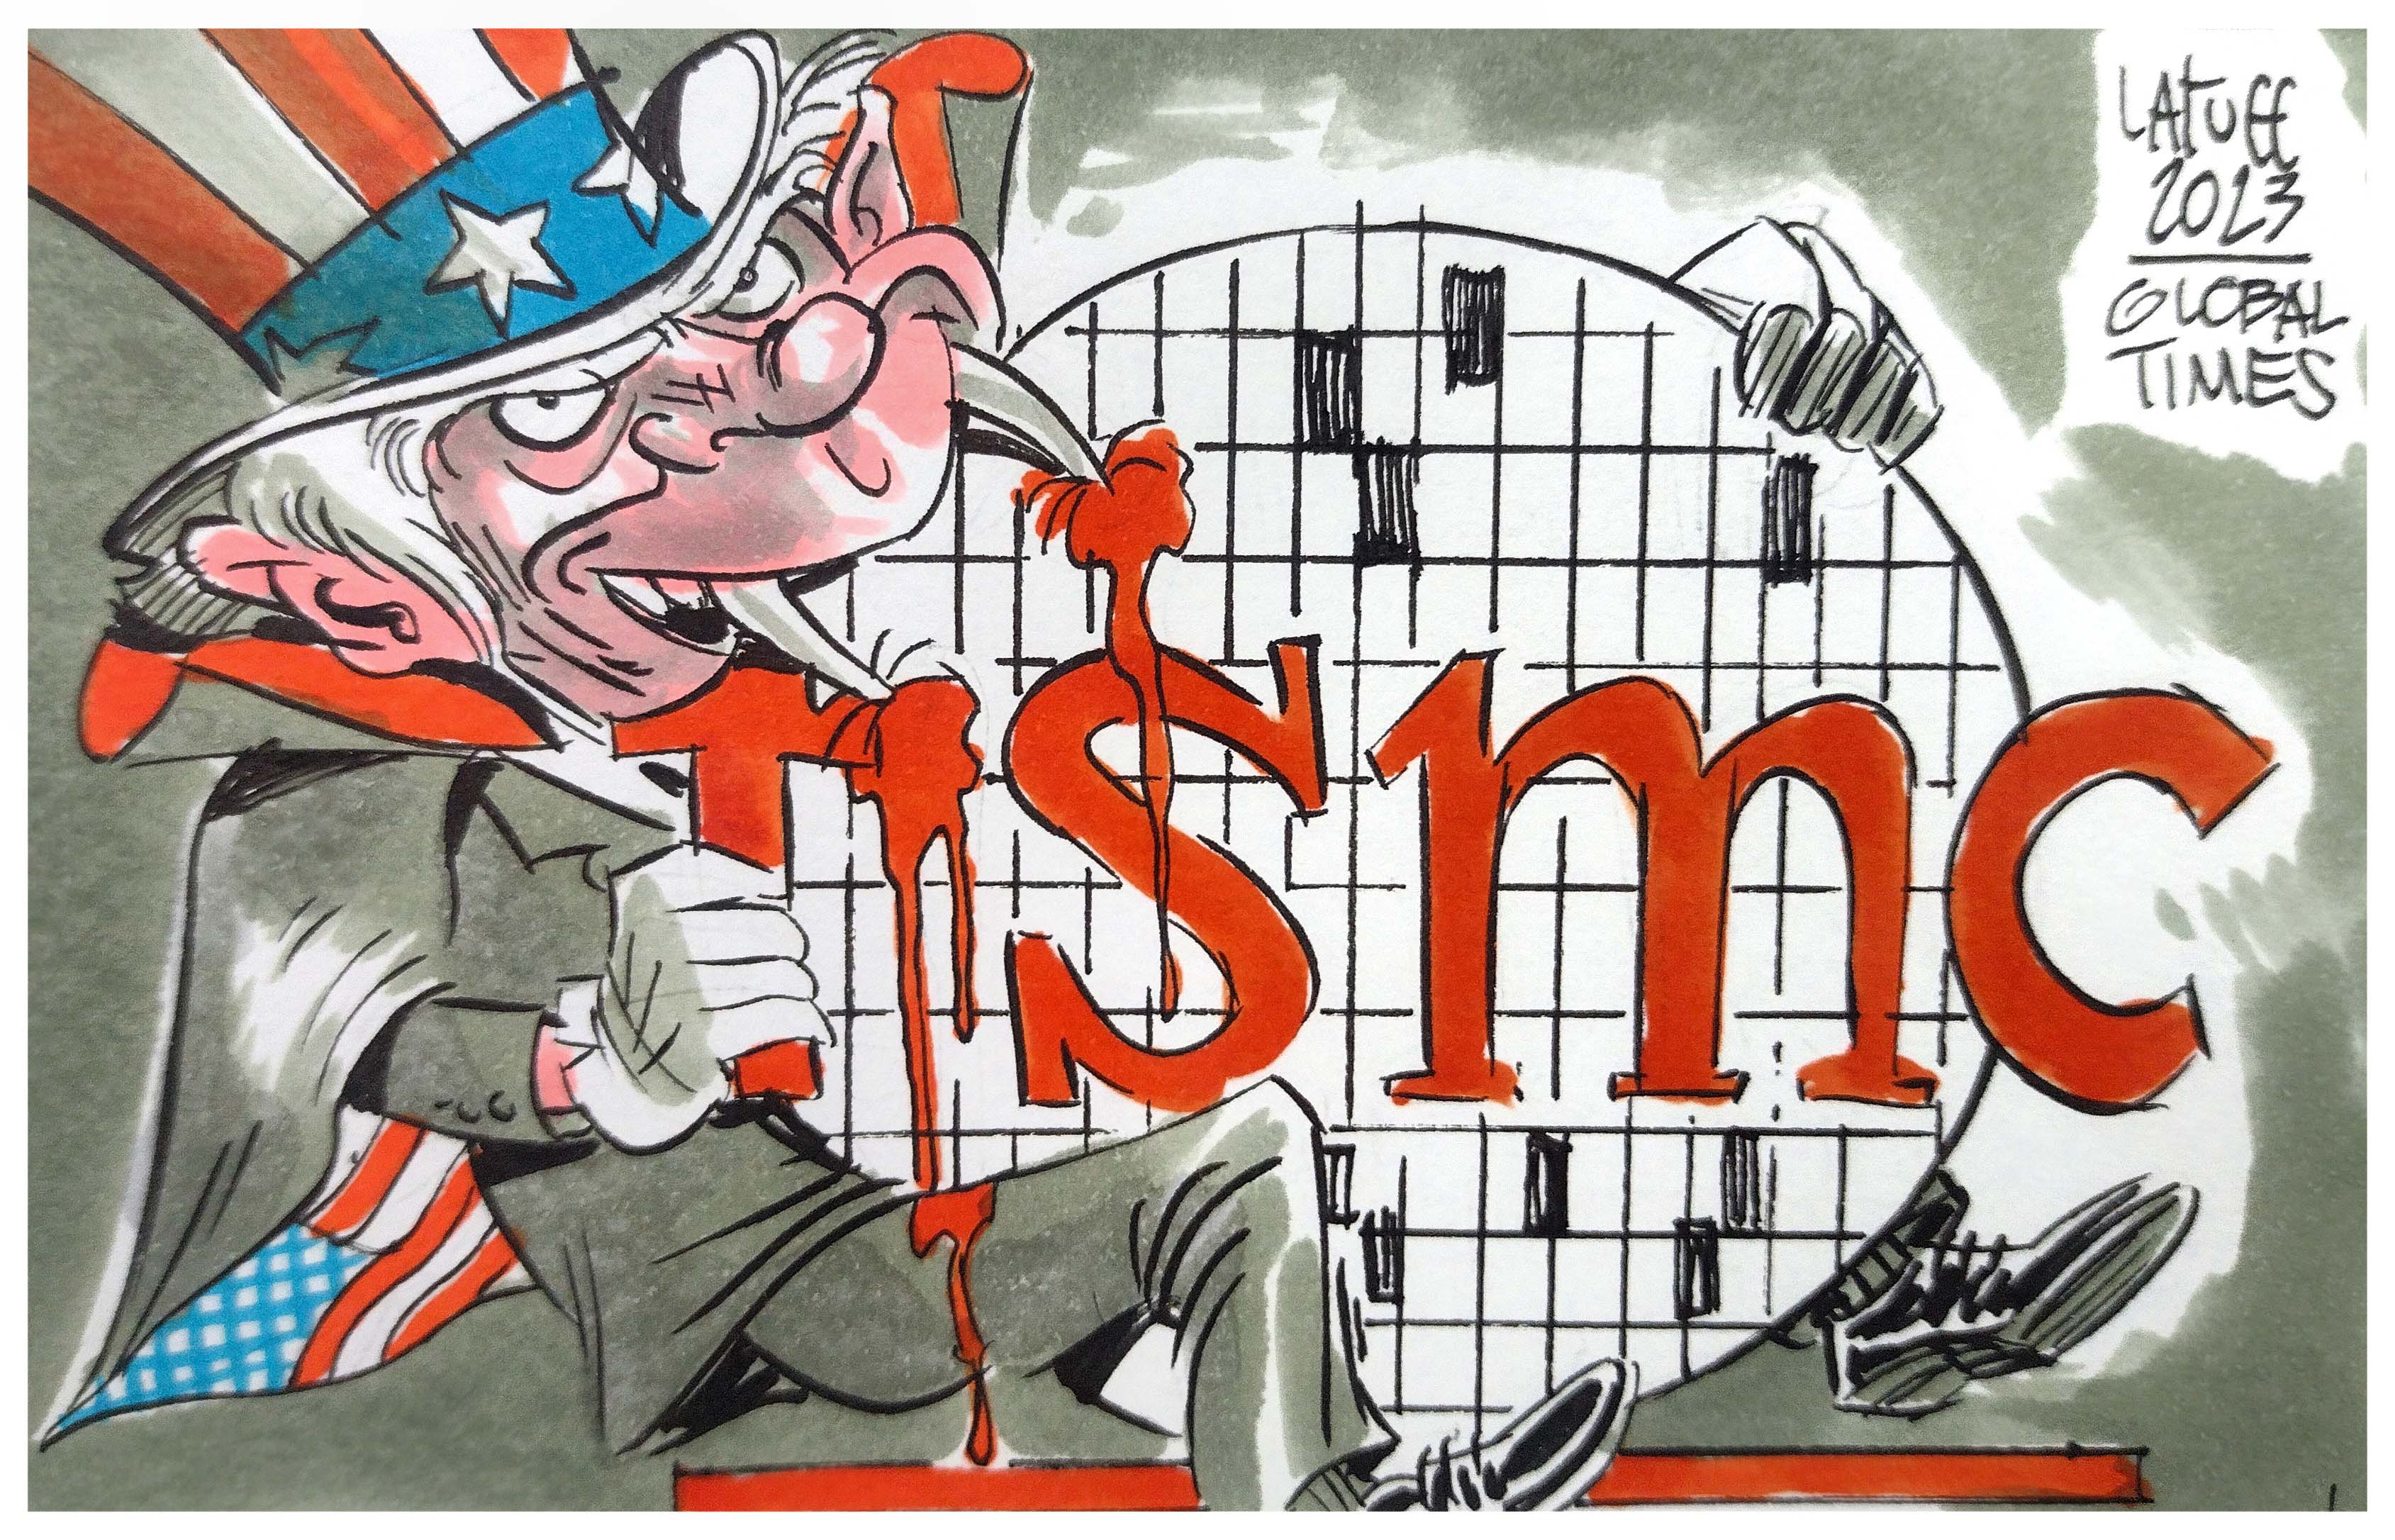 US attempts to cannibalize TSMC and hollow out Taiwan's chip industry. Cartoon: Carlos Latuff